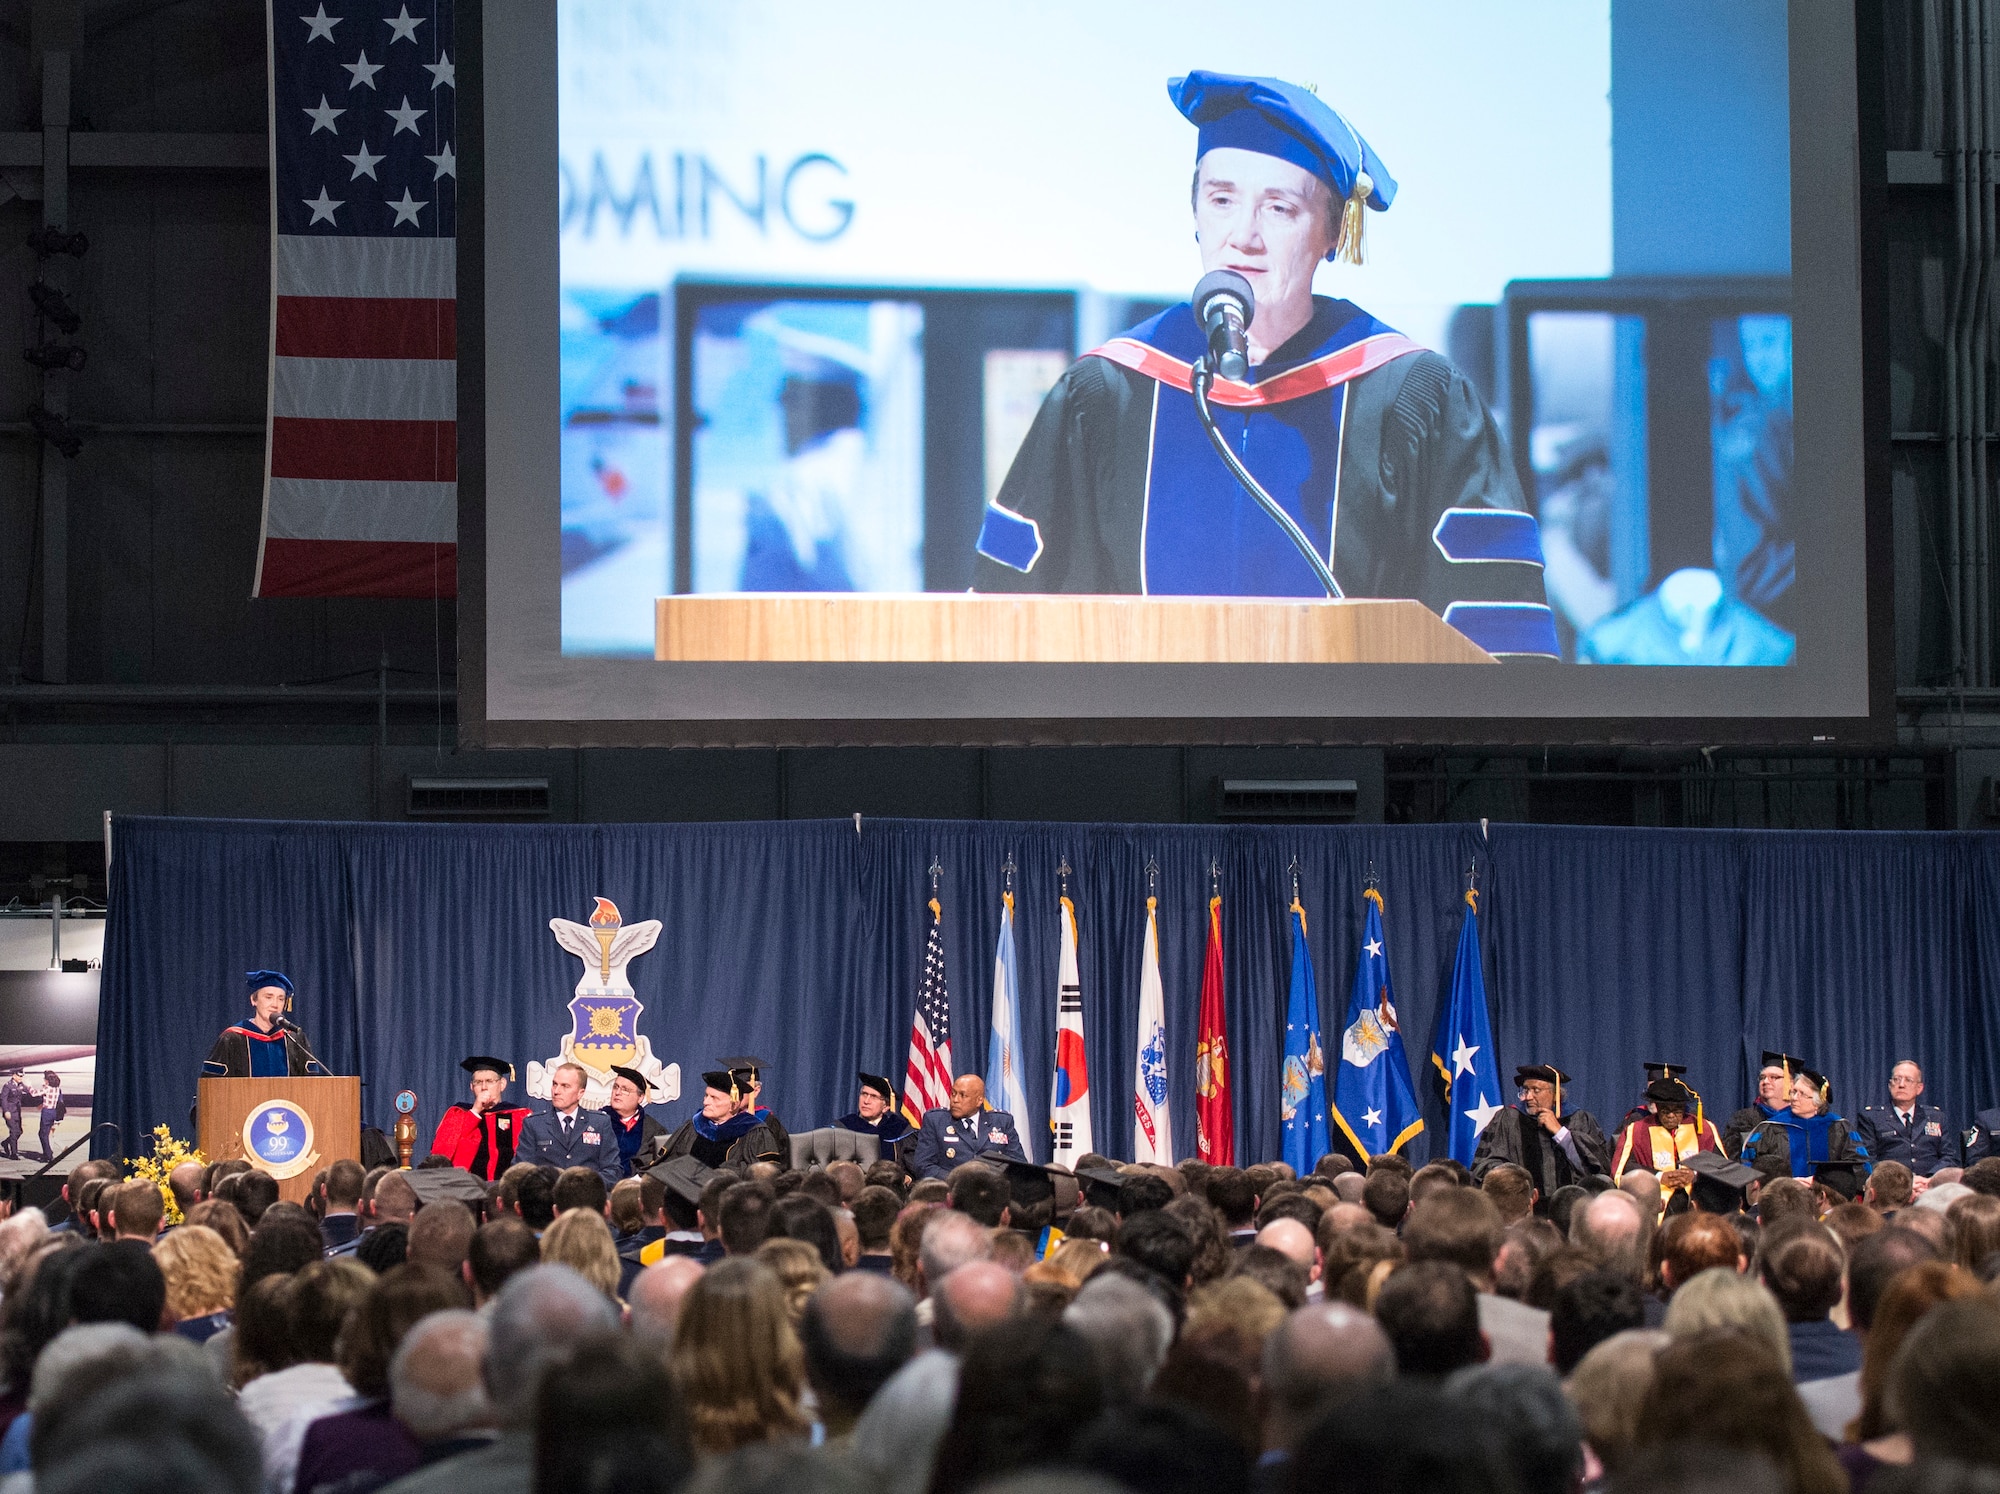 Secretary of the Air Force Heather Wilson gives remarks during the 2018 Air Force Institute of Technology Commencement Ceremony inside the National Museum of the United States Air Force, Dayton, Ohio, March 22, 2018. AFIT is focused on providing exceptional defense-focused research-based graduate education. (U.S. Air Force photo by Wesley Farnsworth)